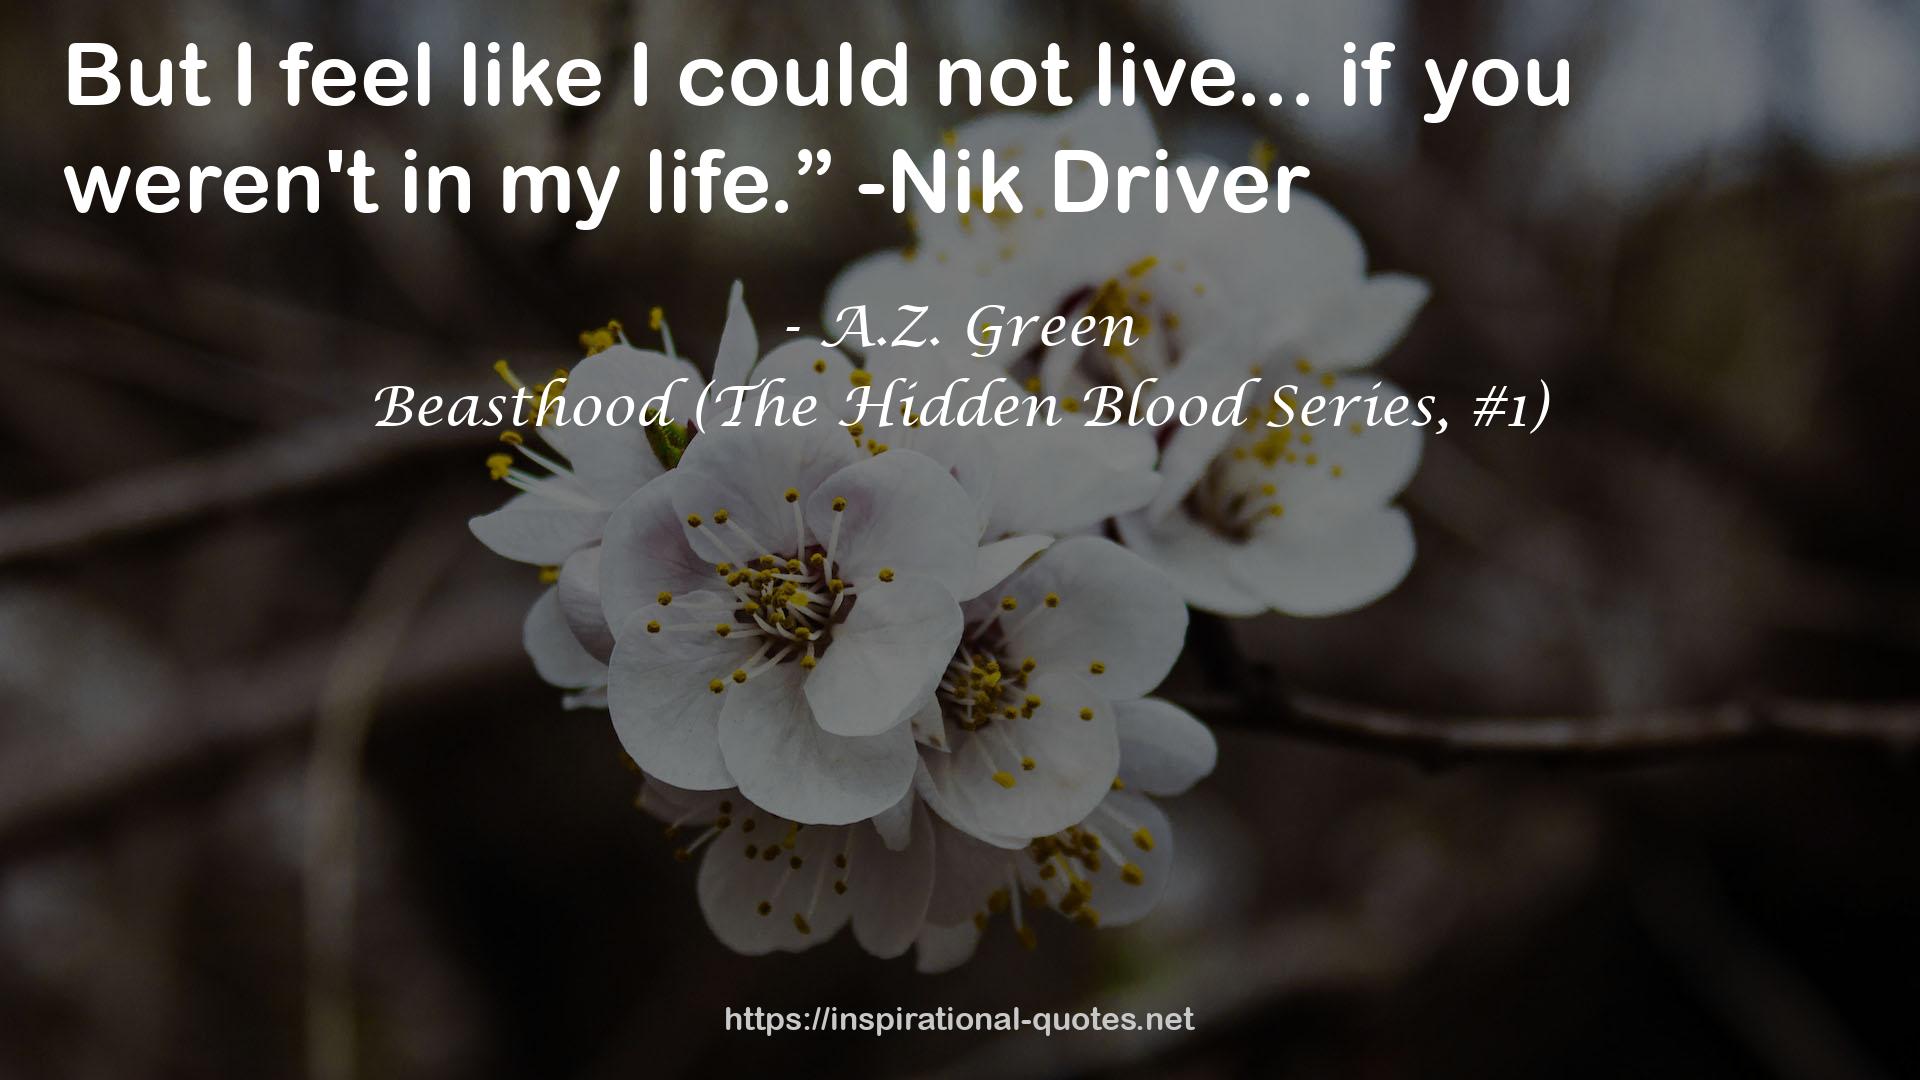 Beasthood (The Hidden Blood Series, #1) QUOTES